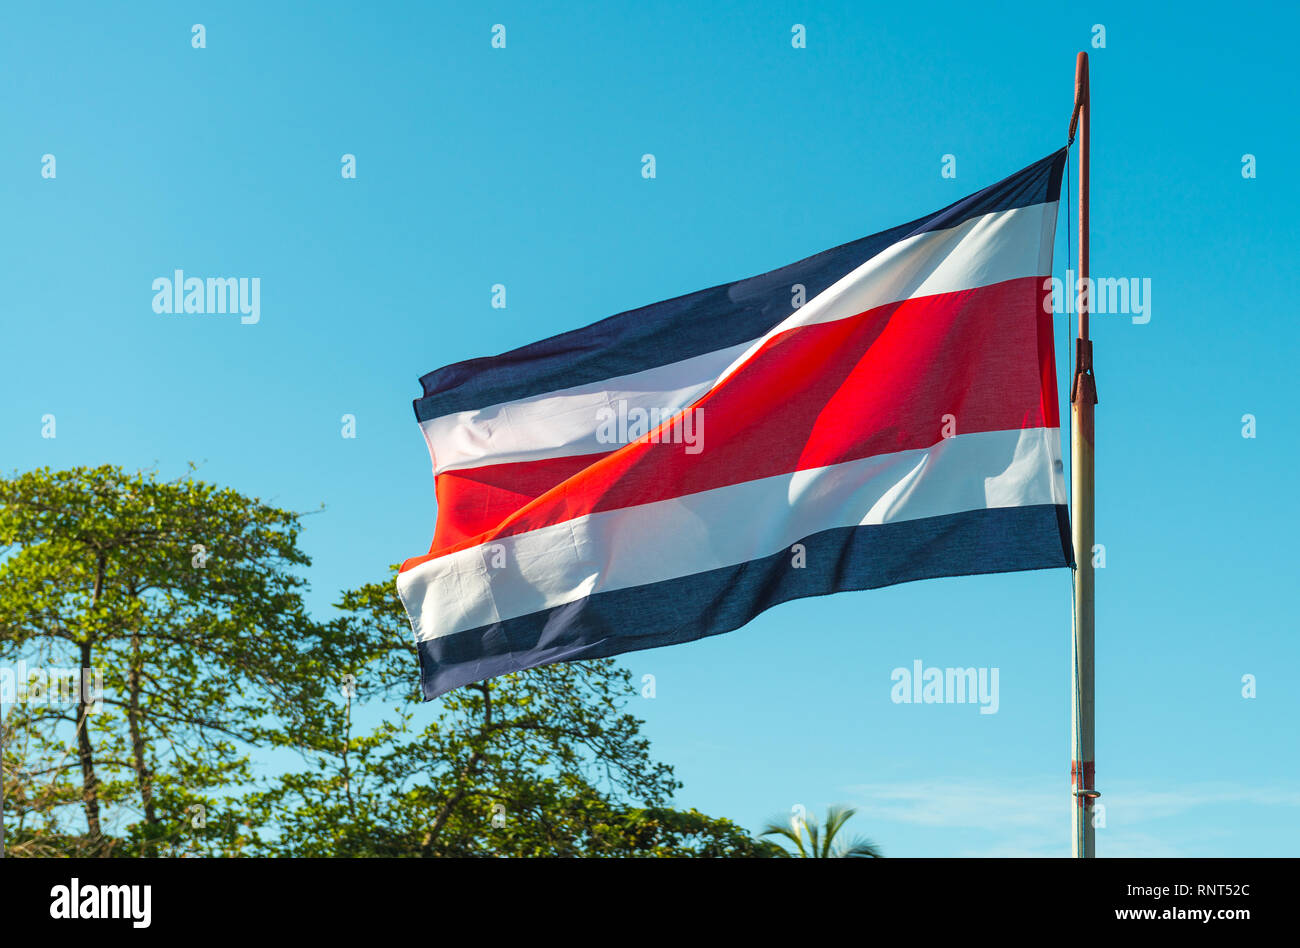 The flag of the democratic republic of Costa Rica in Central America waving in the wind with tree canopy in the background. Stock Photo